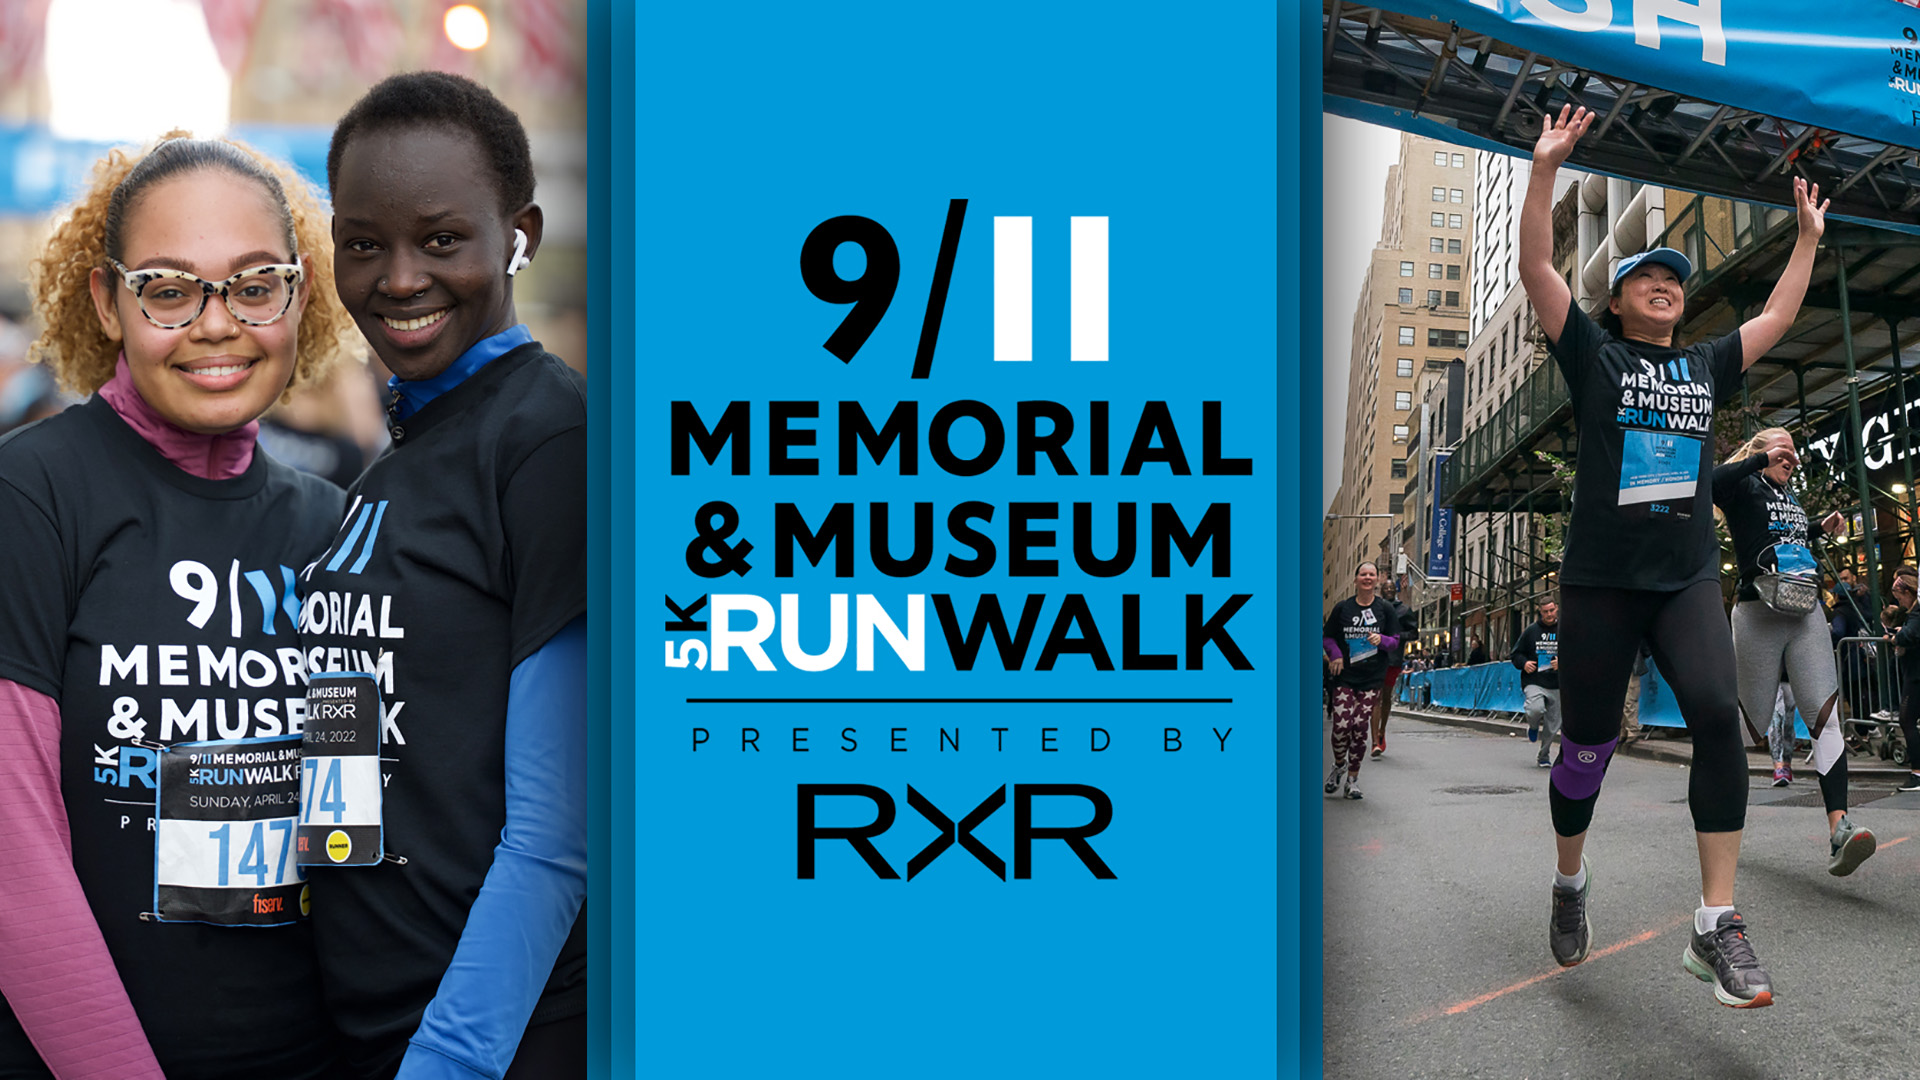 From left, two participants standing and posing, one participant running with hands raised high in victory. Text between reads 9/11 Memorial & Museum 5K RunWalk Presented by RXR 